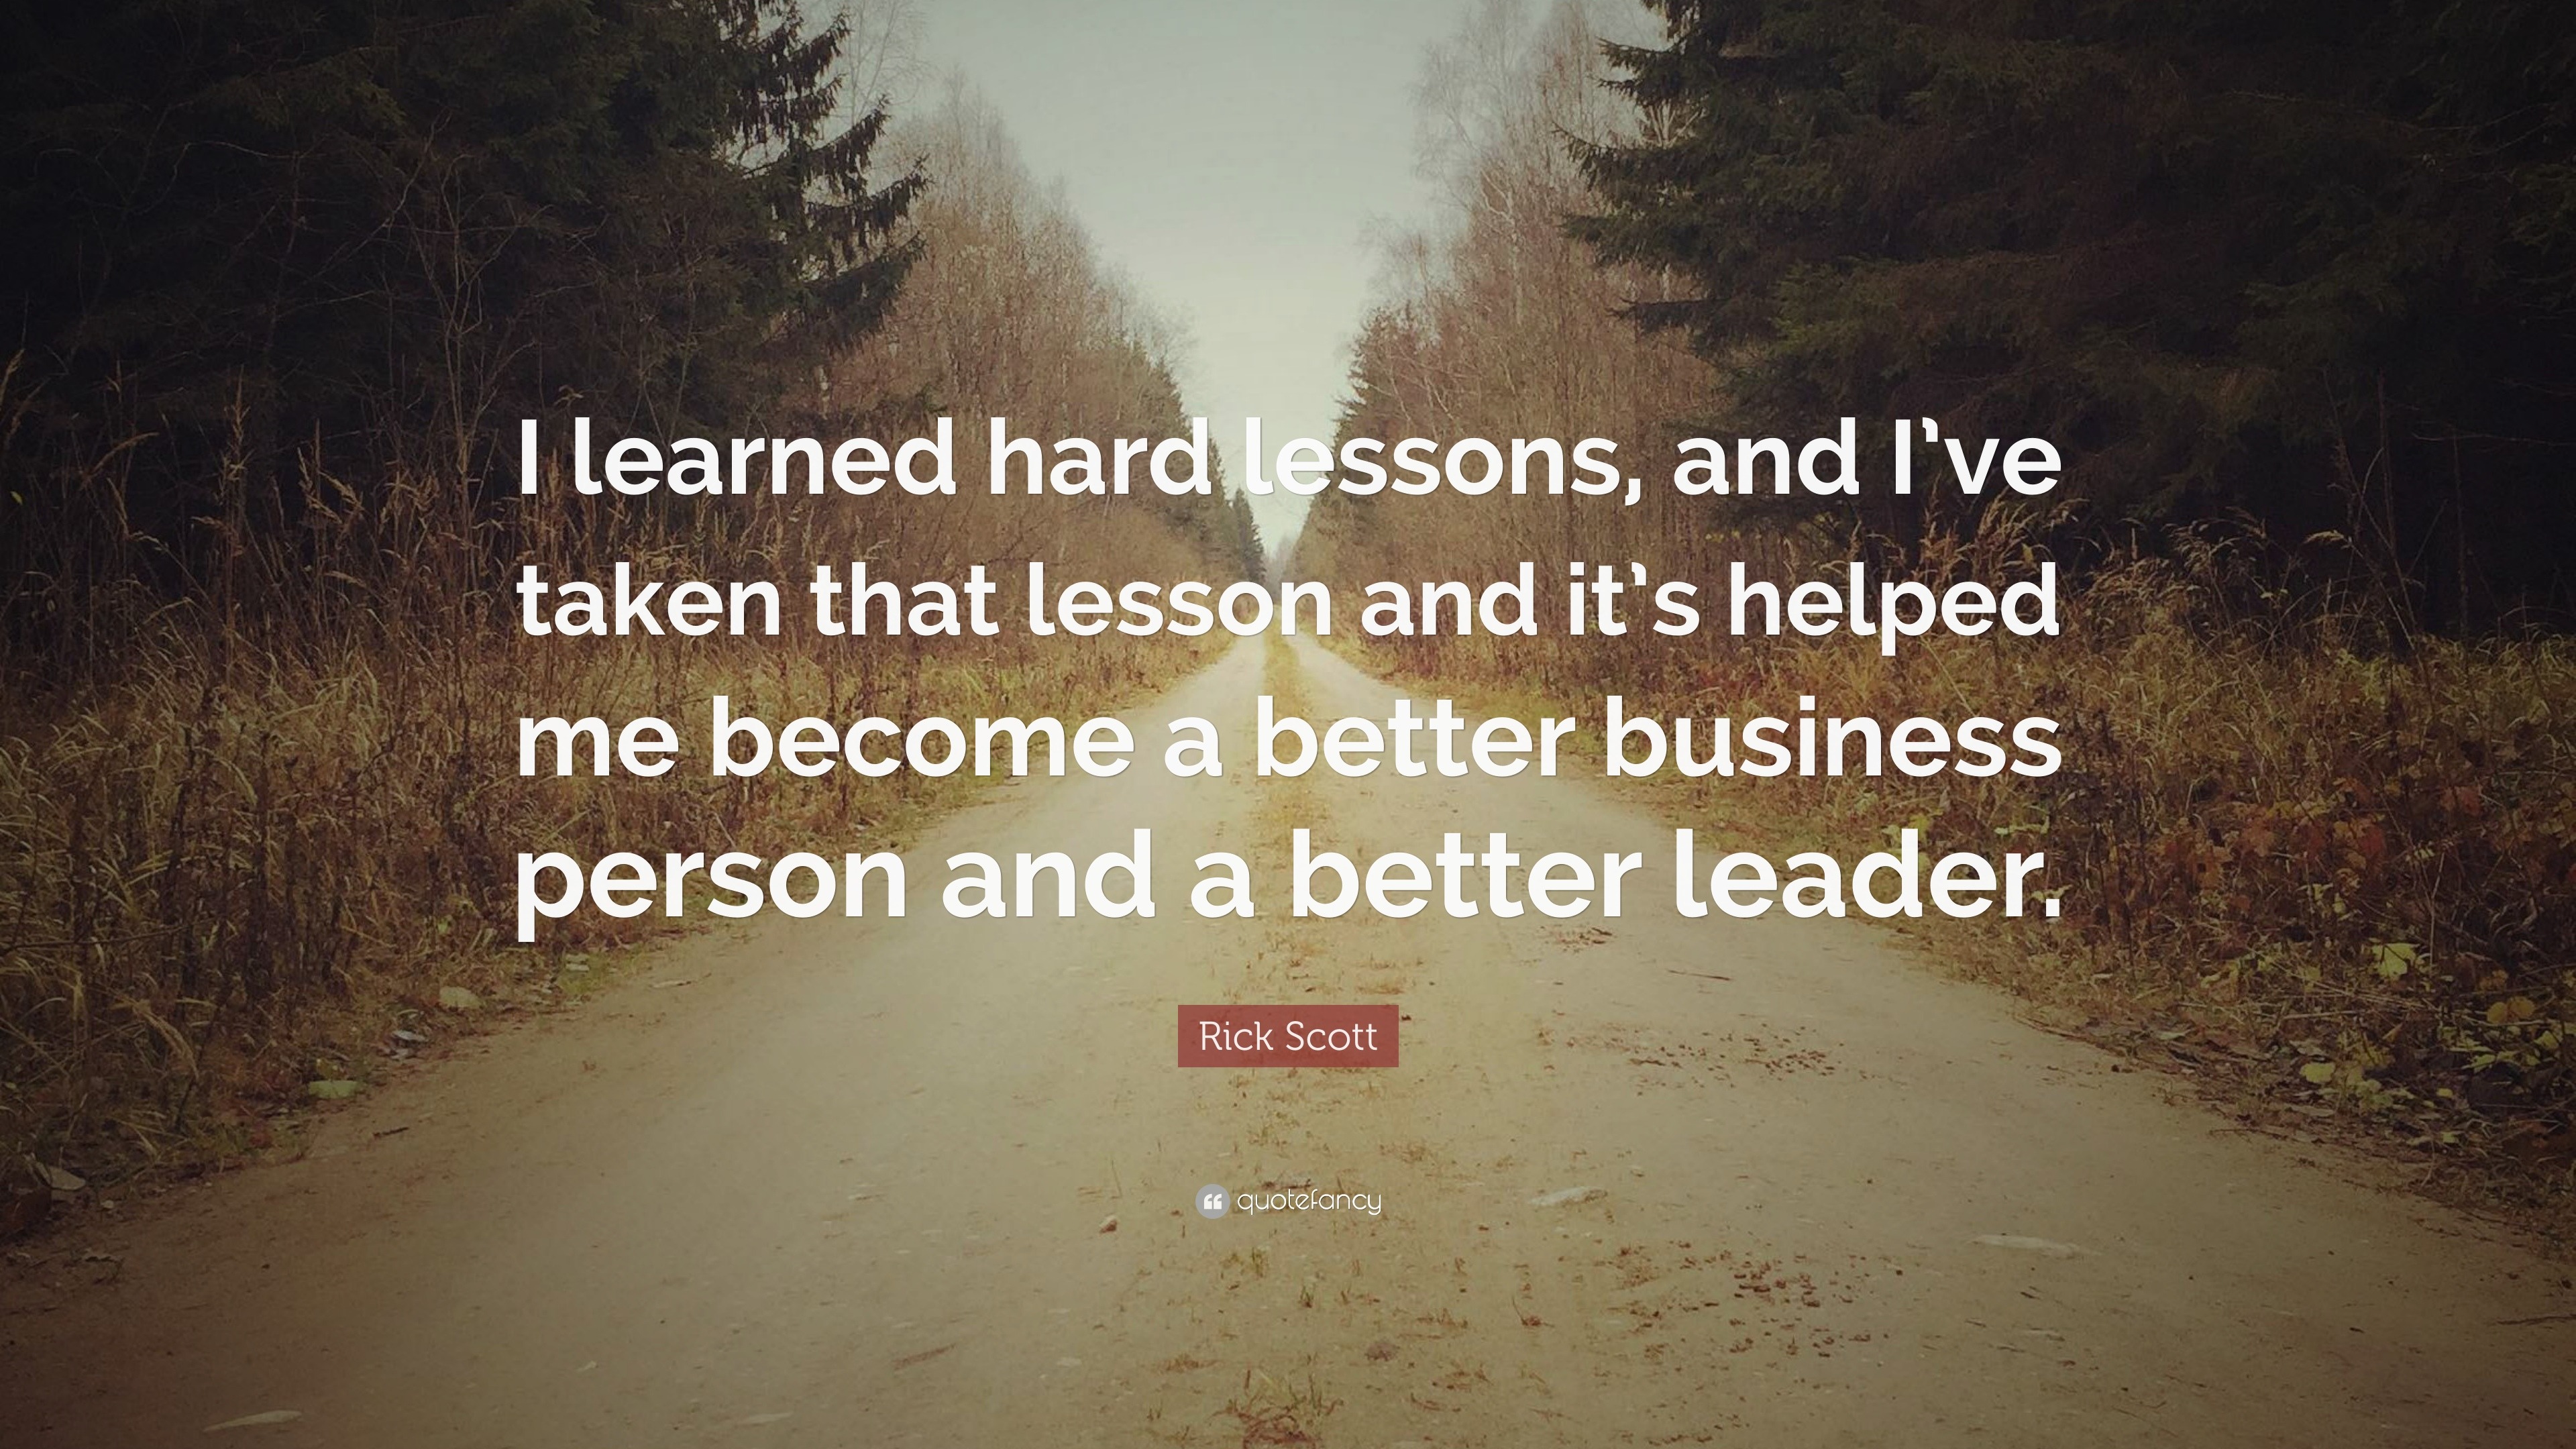 TOP 25 HARD LESSONS QUOTES